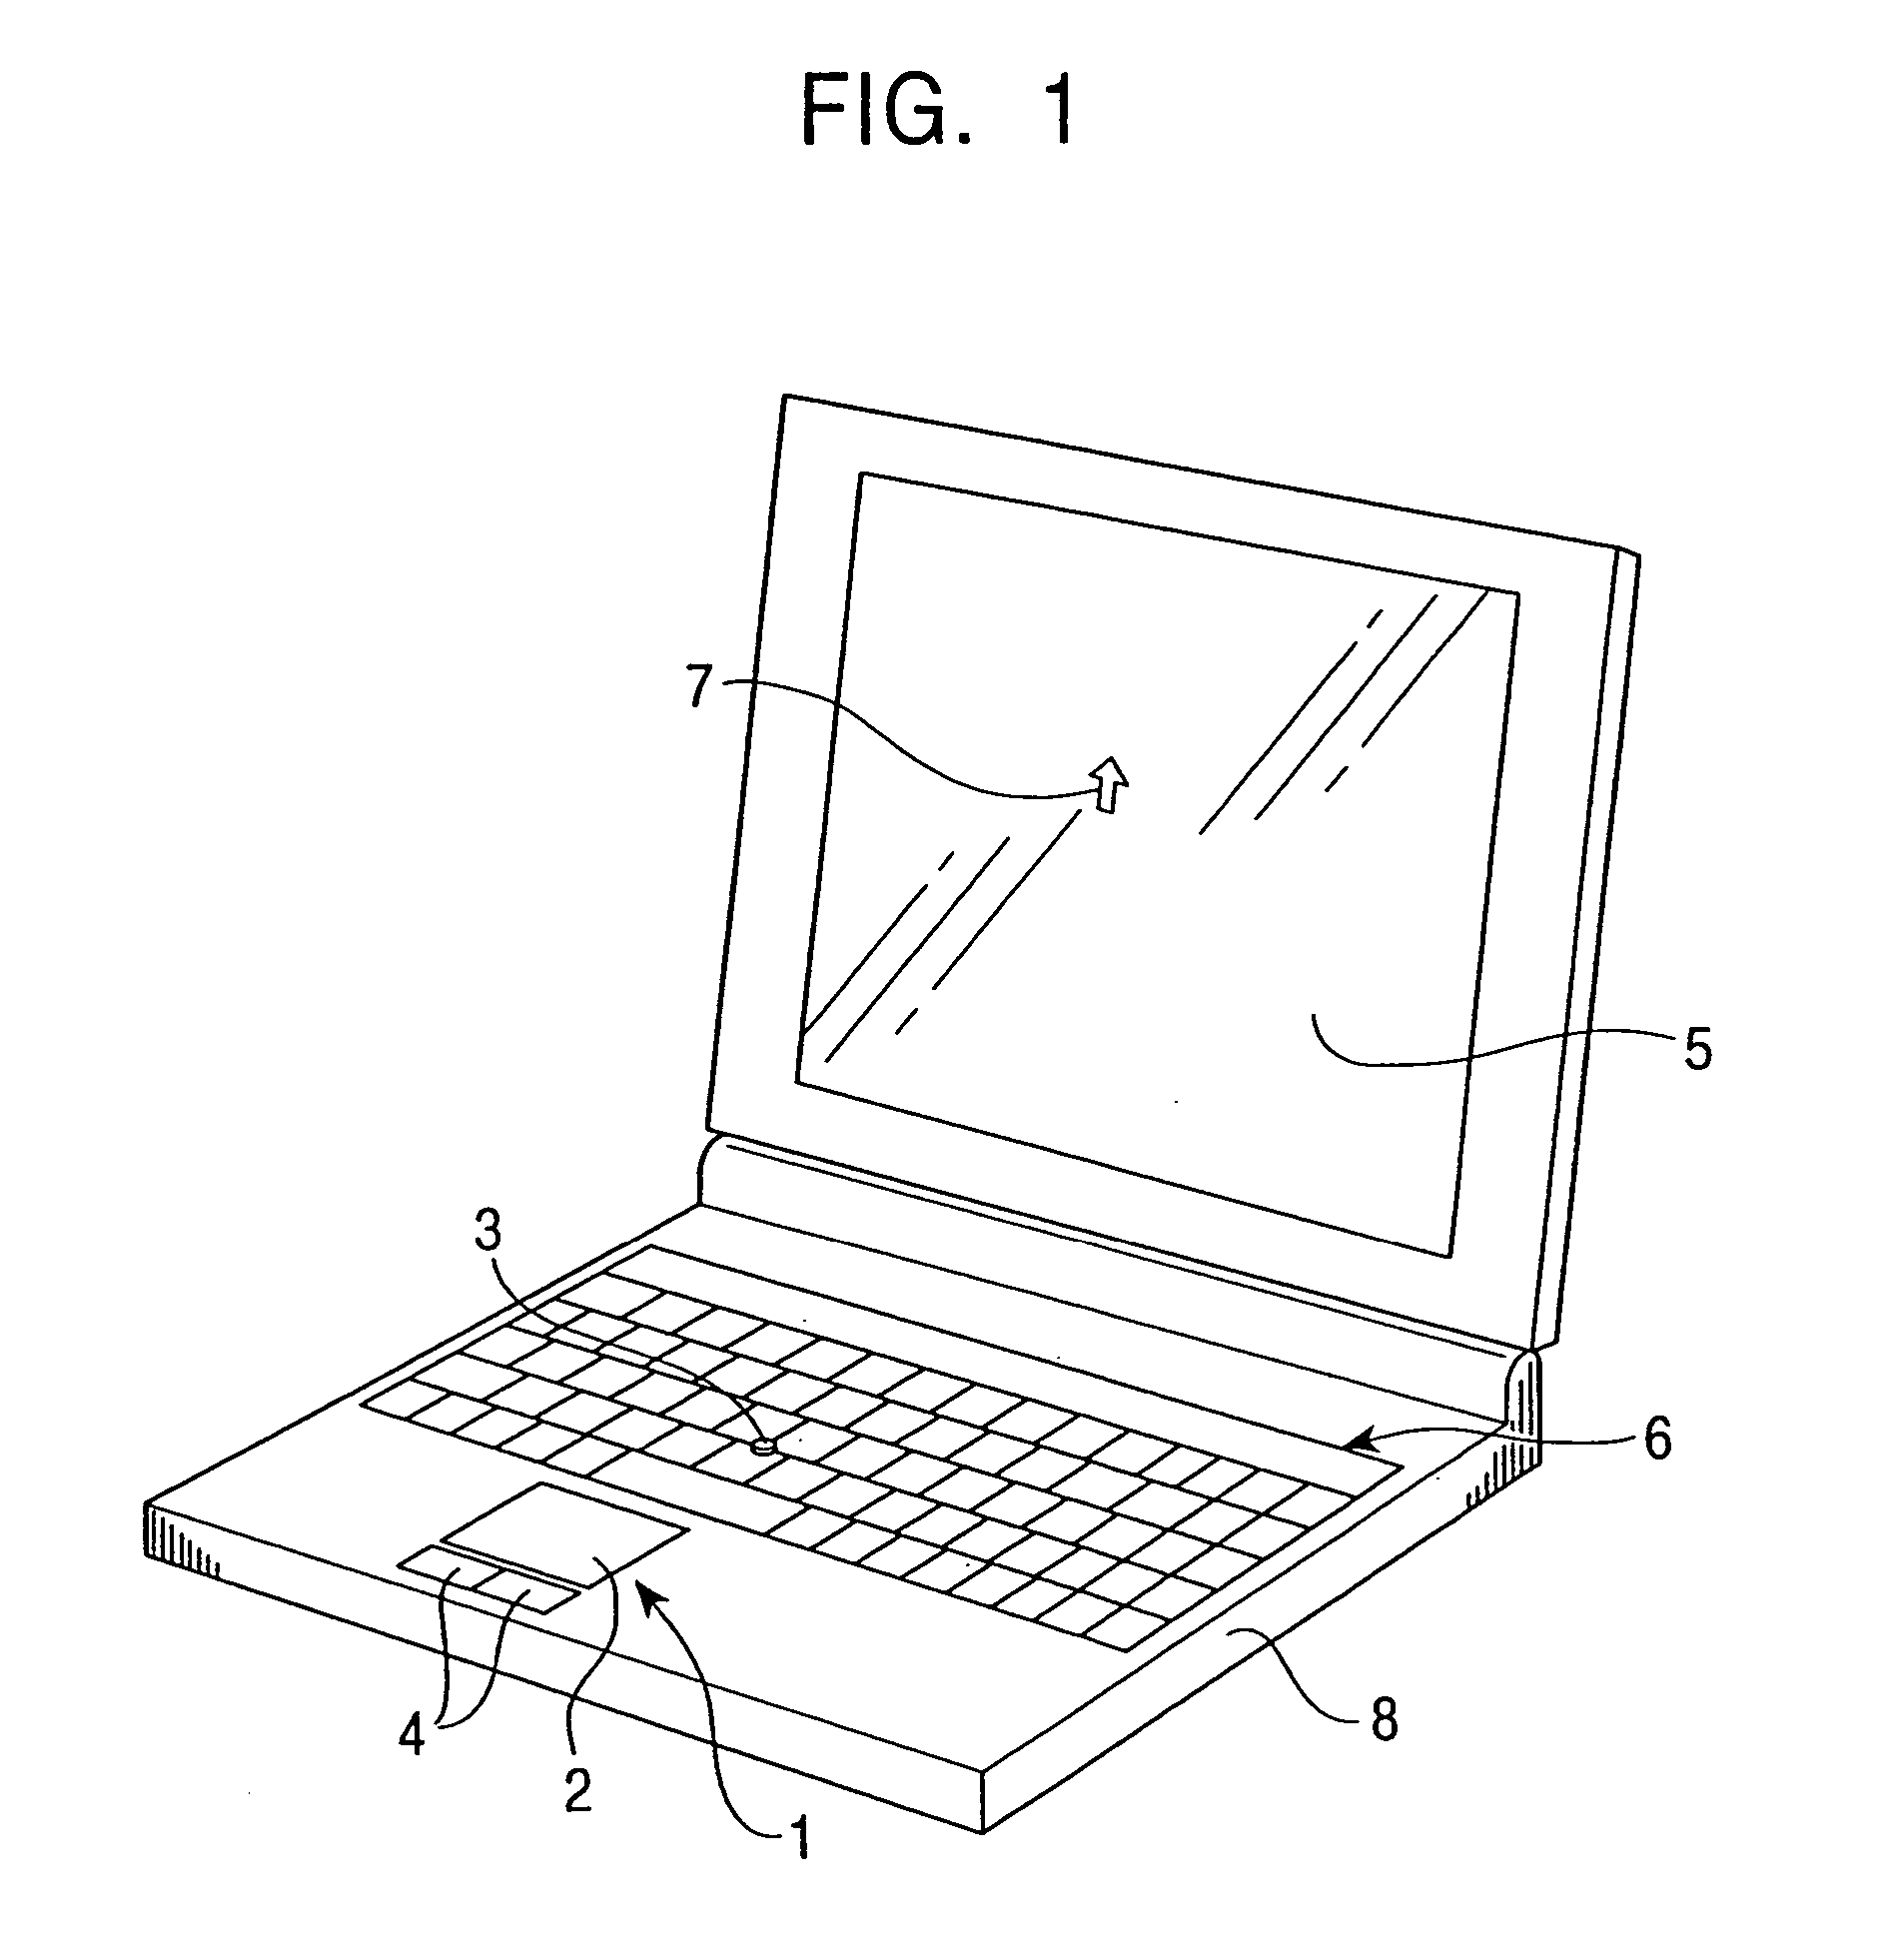 Dual pointing device used to control a cursor having absolute and relative pointing devices